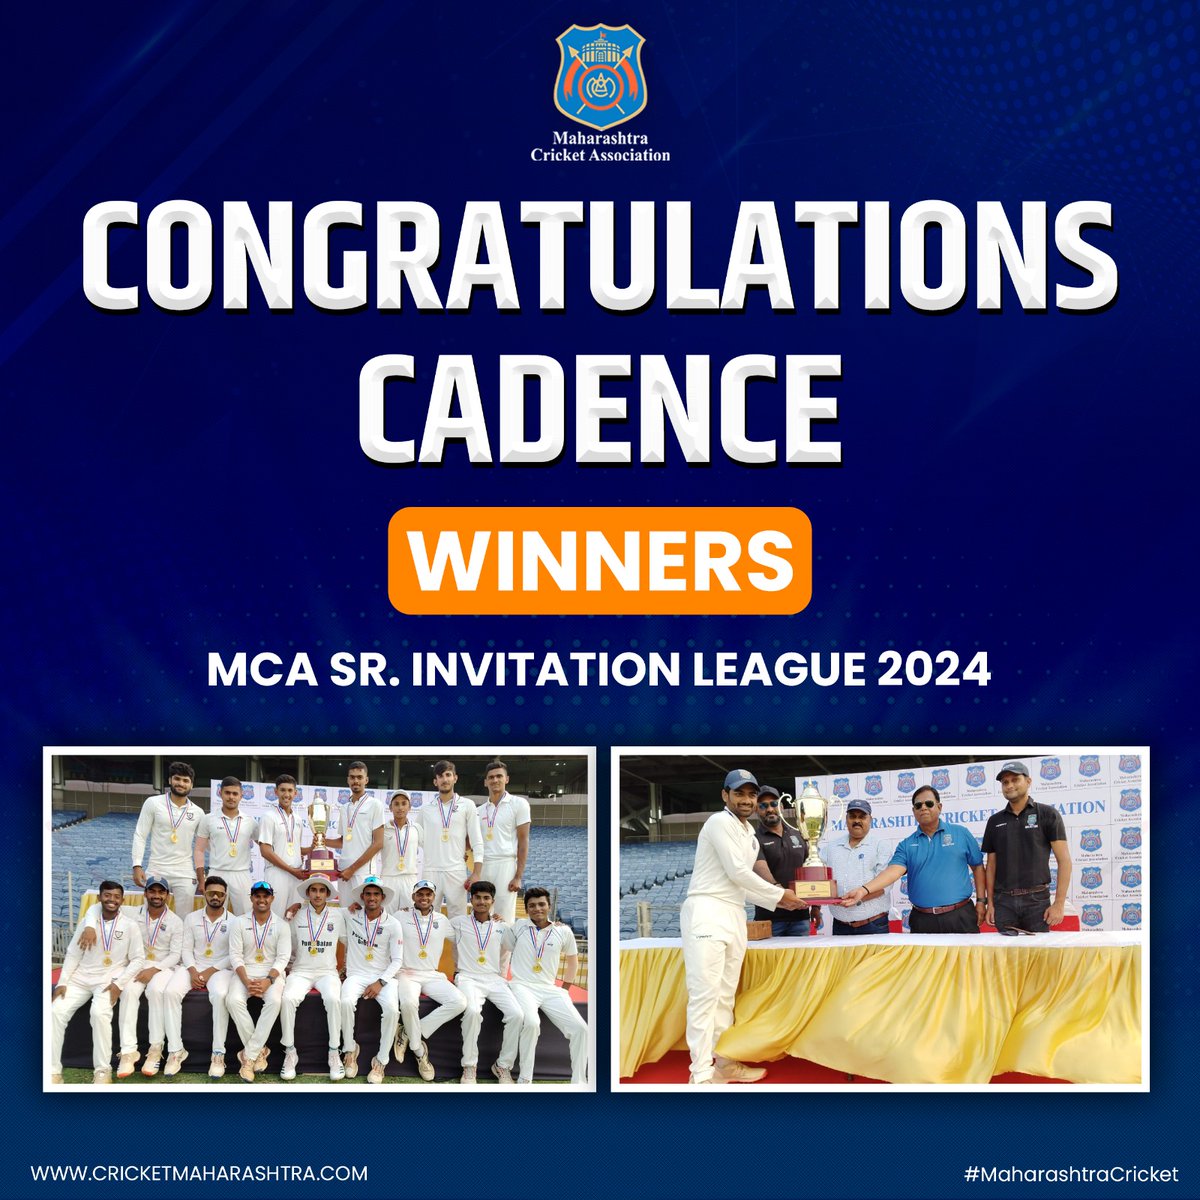 Cadence strikes the perfect note as they clinch victory in the MCA Senior Invitation League 2024, showcasing skill, precision, and the rhythm of champions. #PBKJCA #MegaFinal #MCASeniorInvitationLeague #Cadence #MahaCricket #Cricket #MCA #MaharashtraCricket